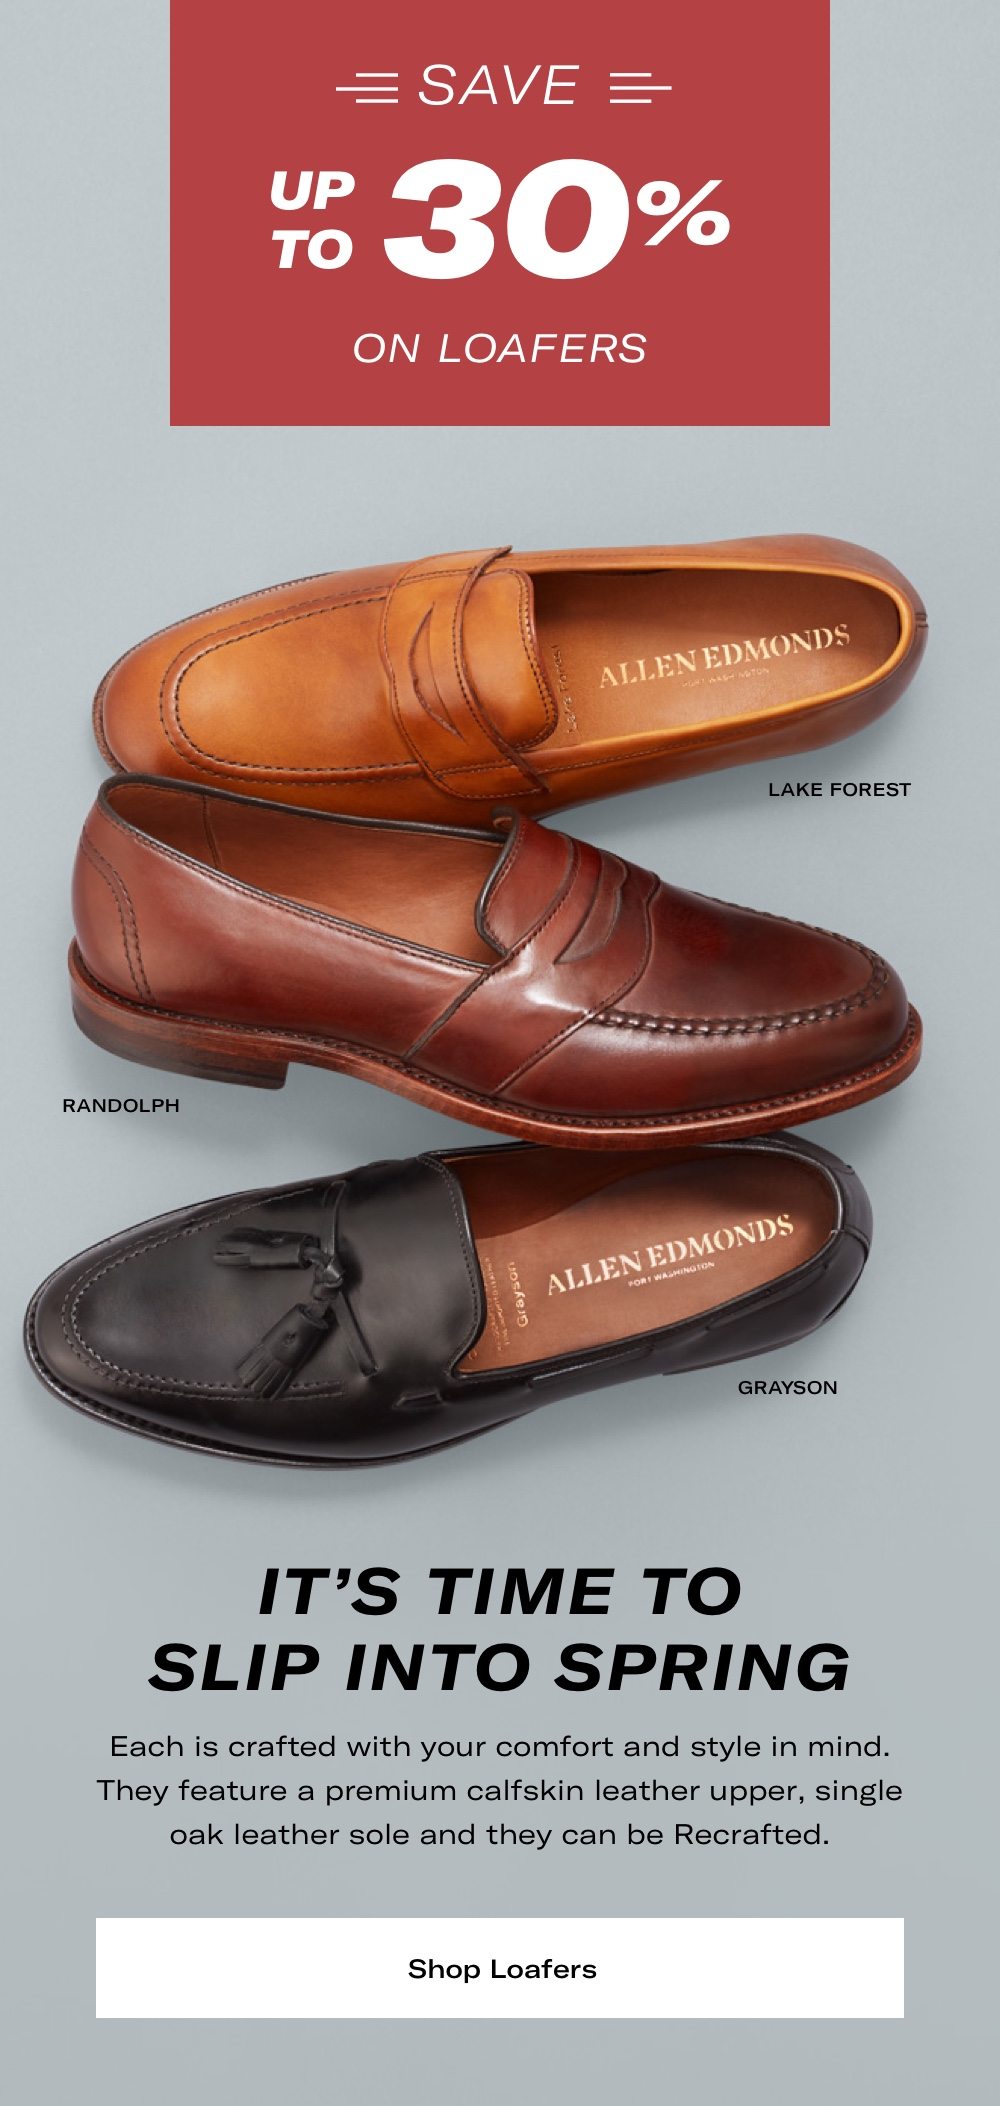 It's Time to Slip into Spring. Save Up To 30% on Loafers